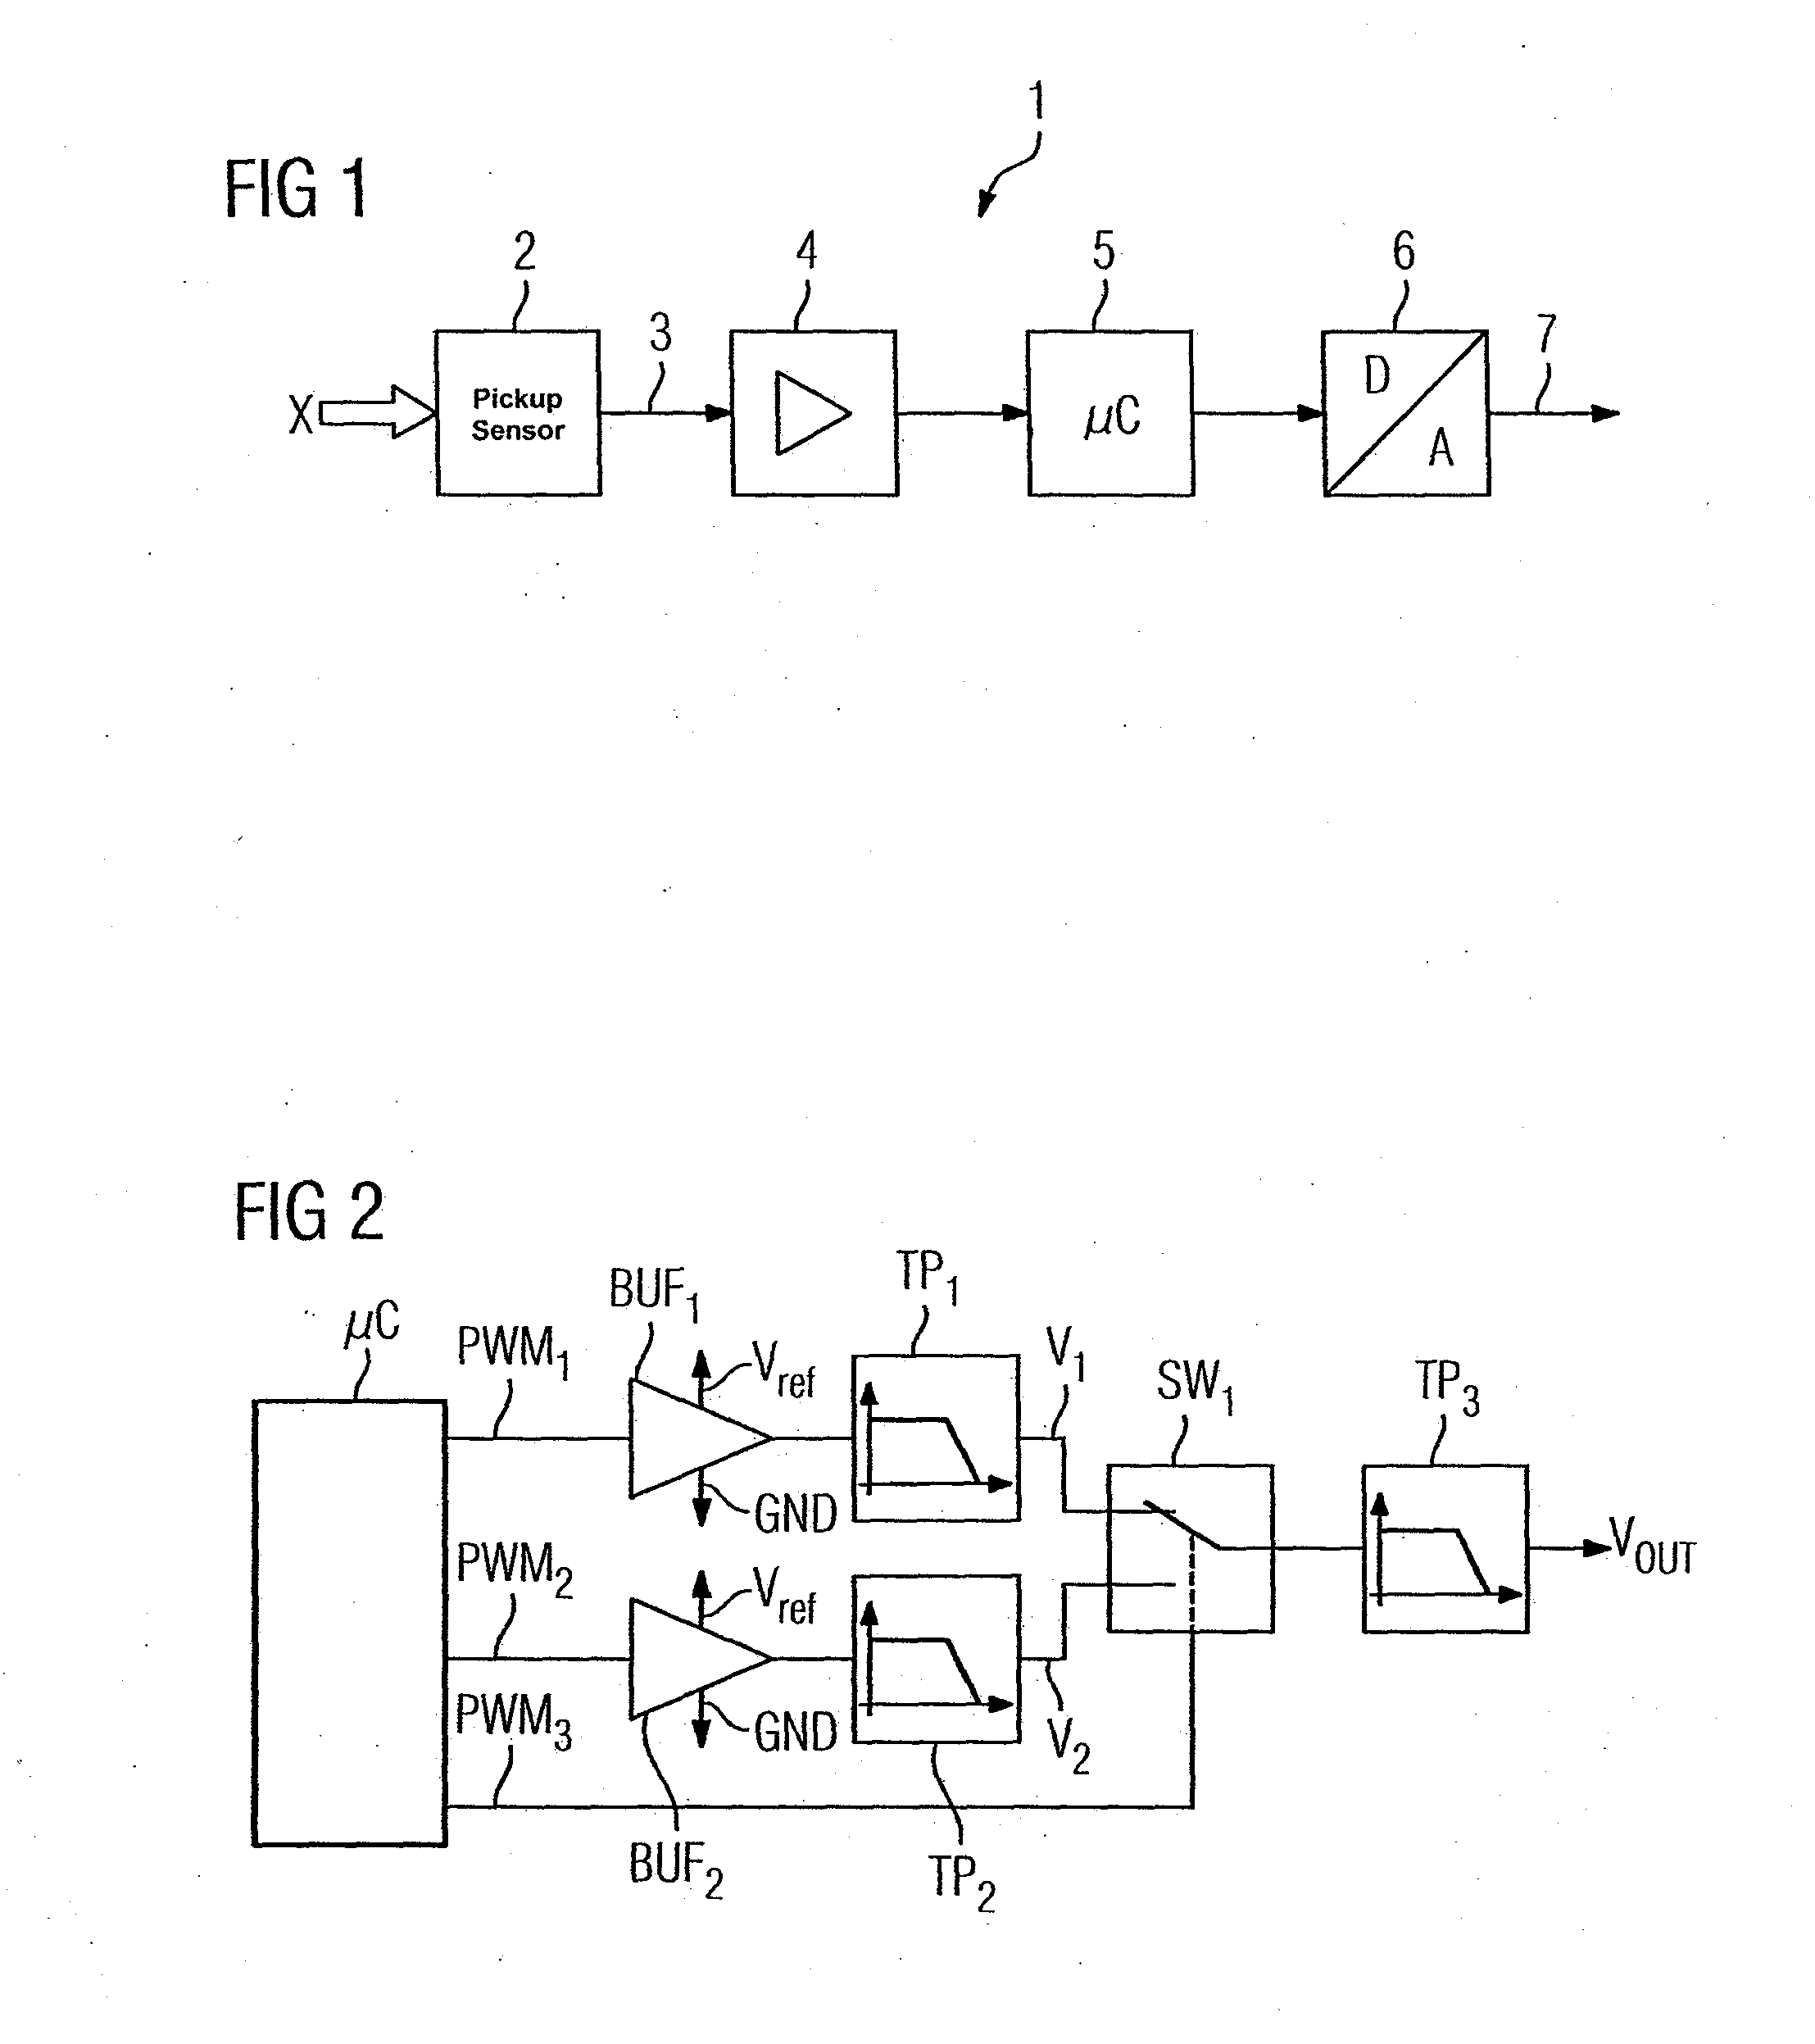 Field Device Having an Analog Output